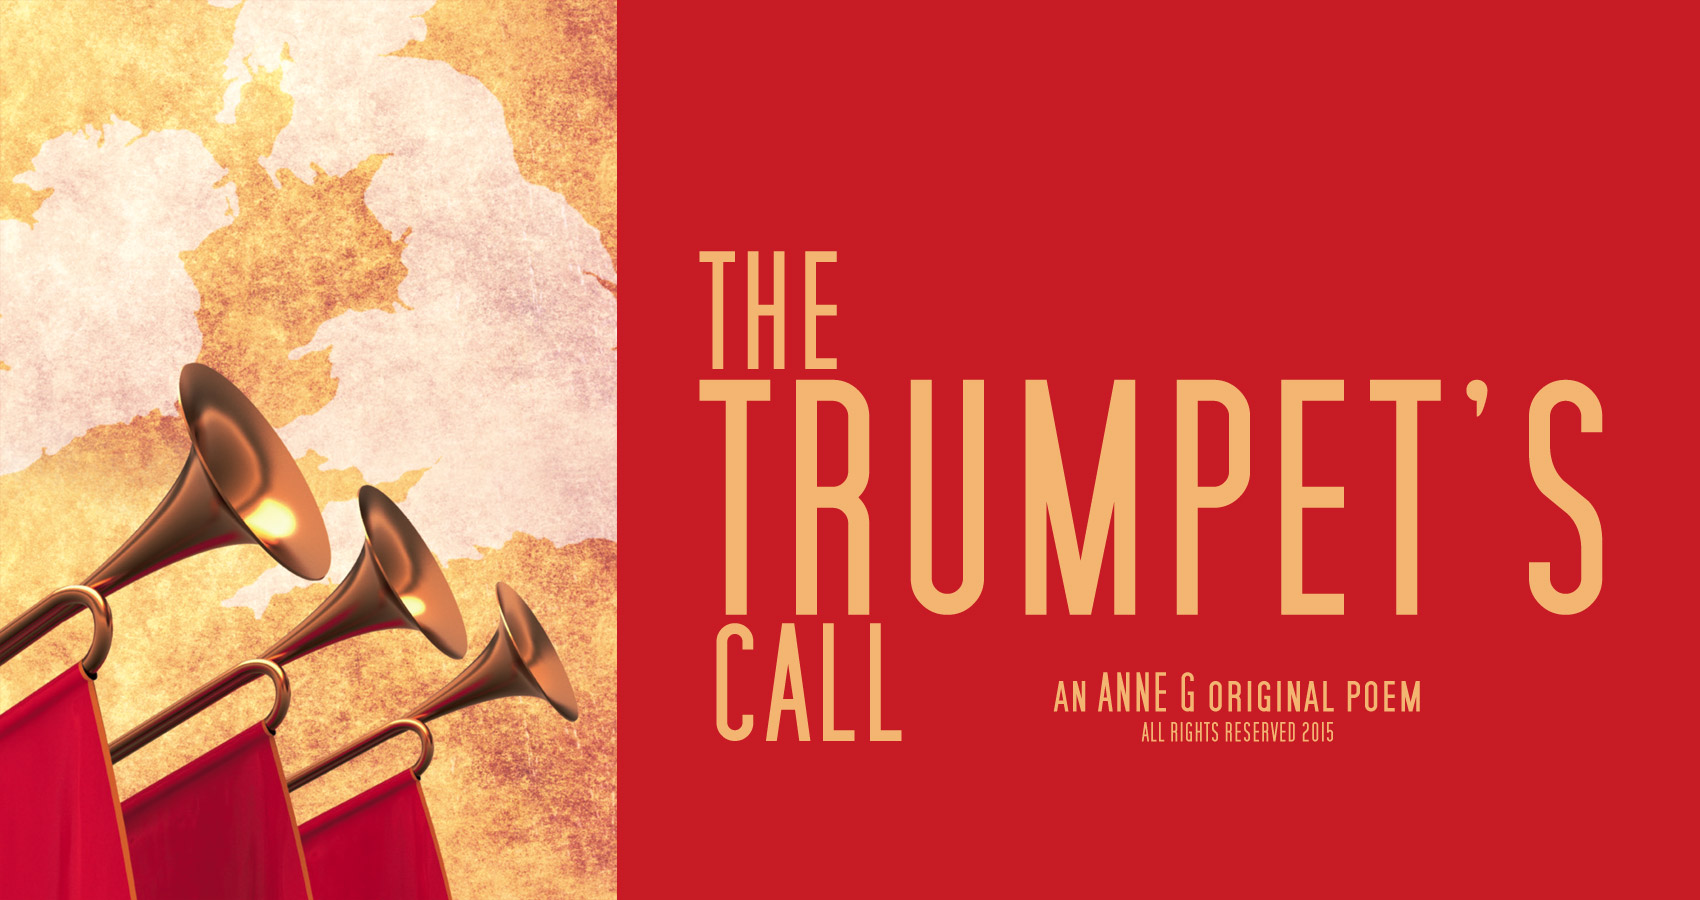 The Trumpets Call Prose Poetry at spillwords.com